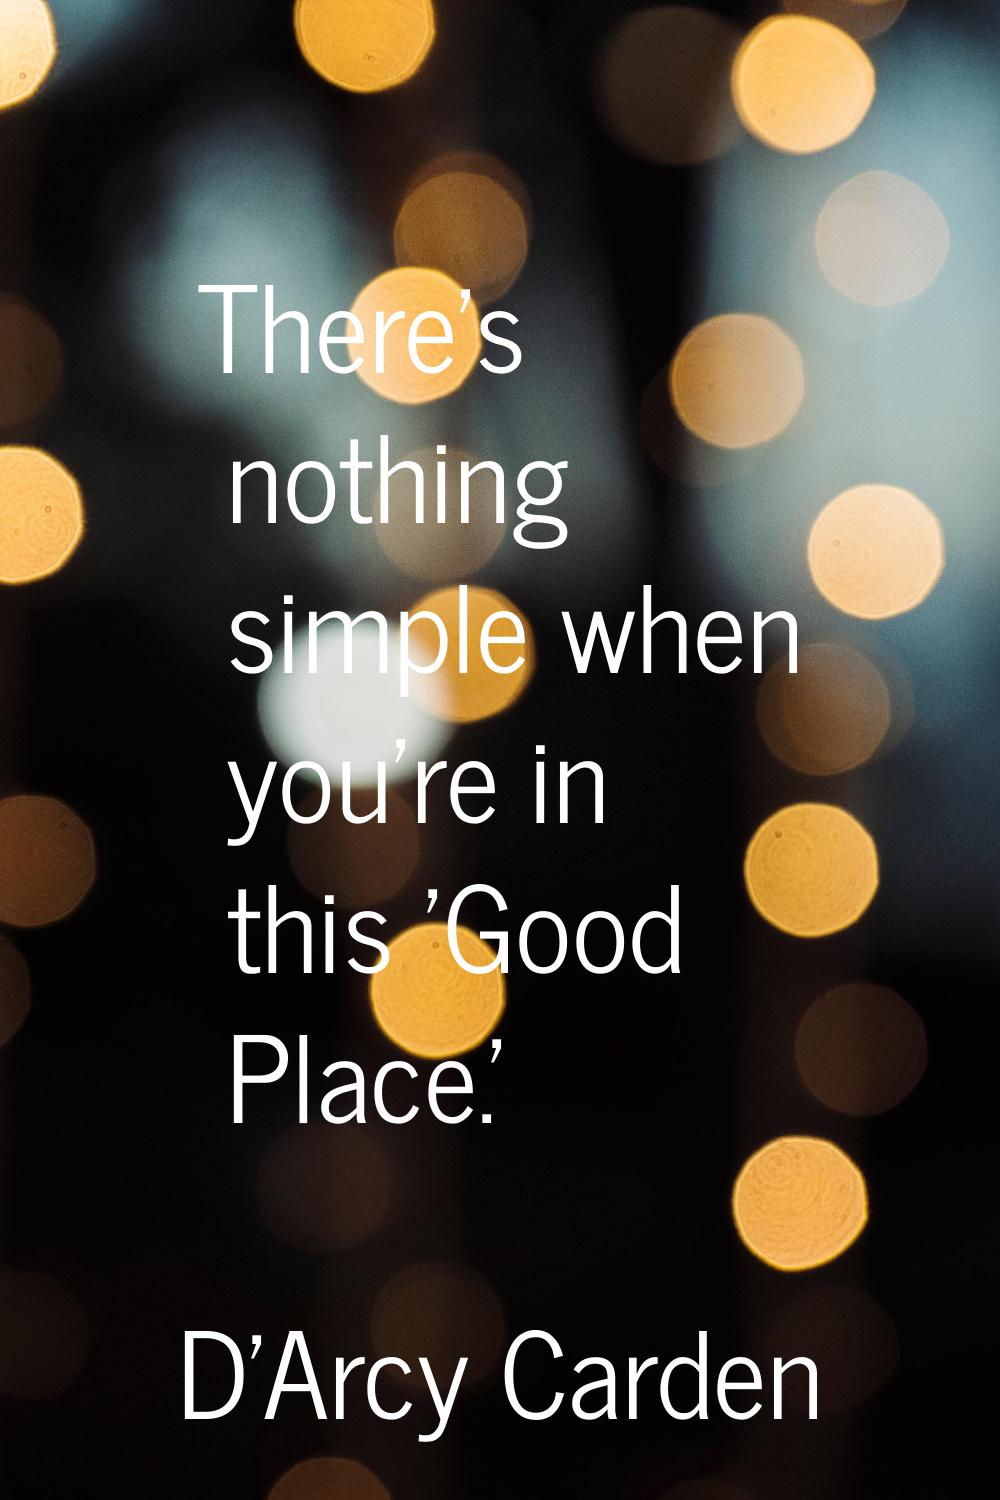 There's nothing simple when you're in this 'Good Place.'